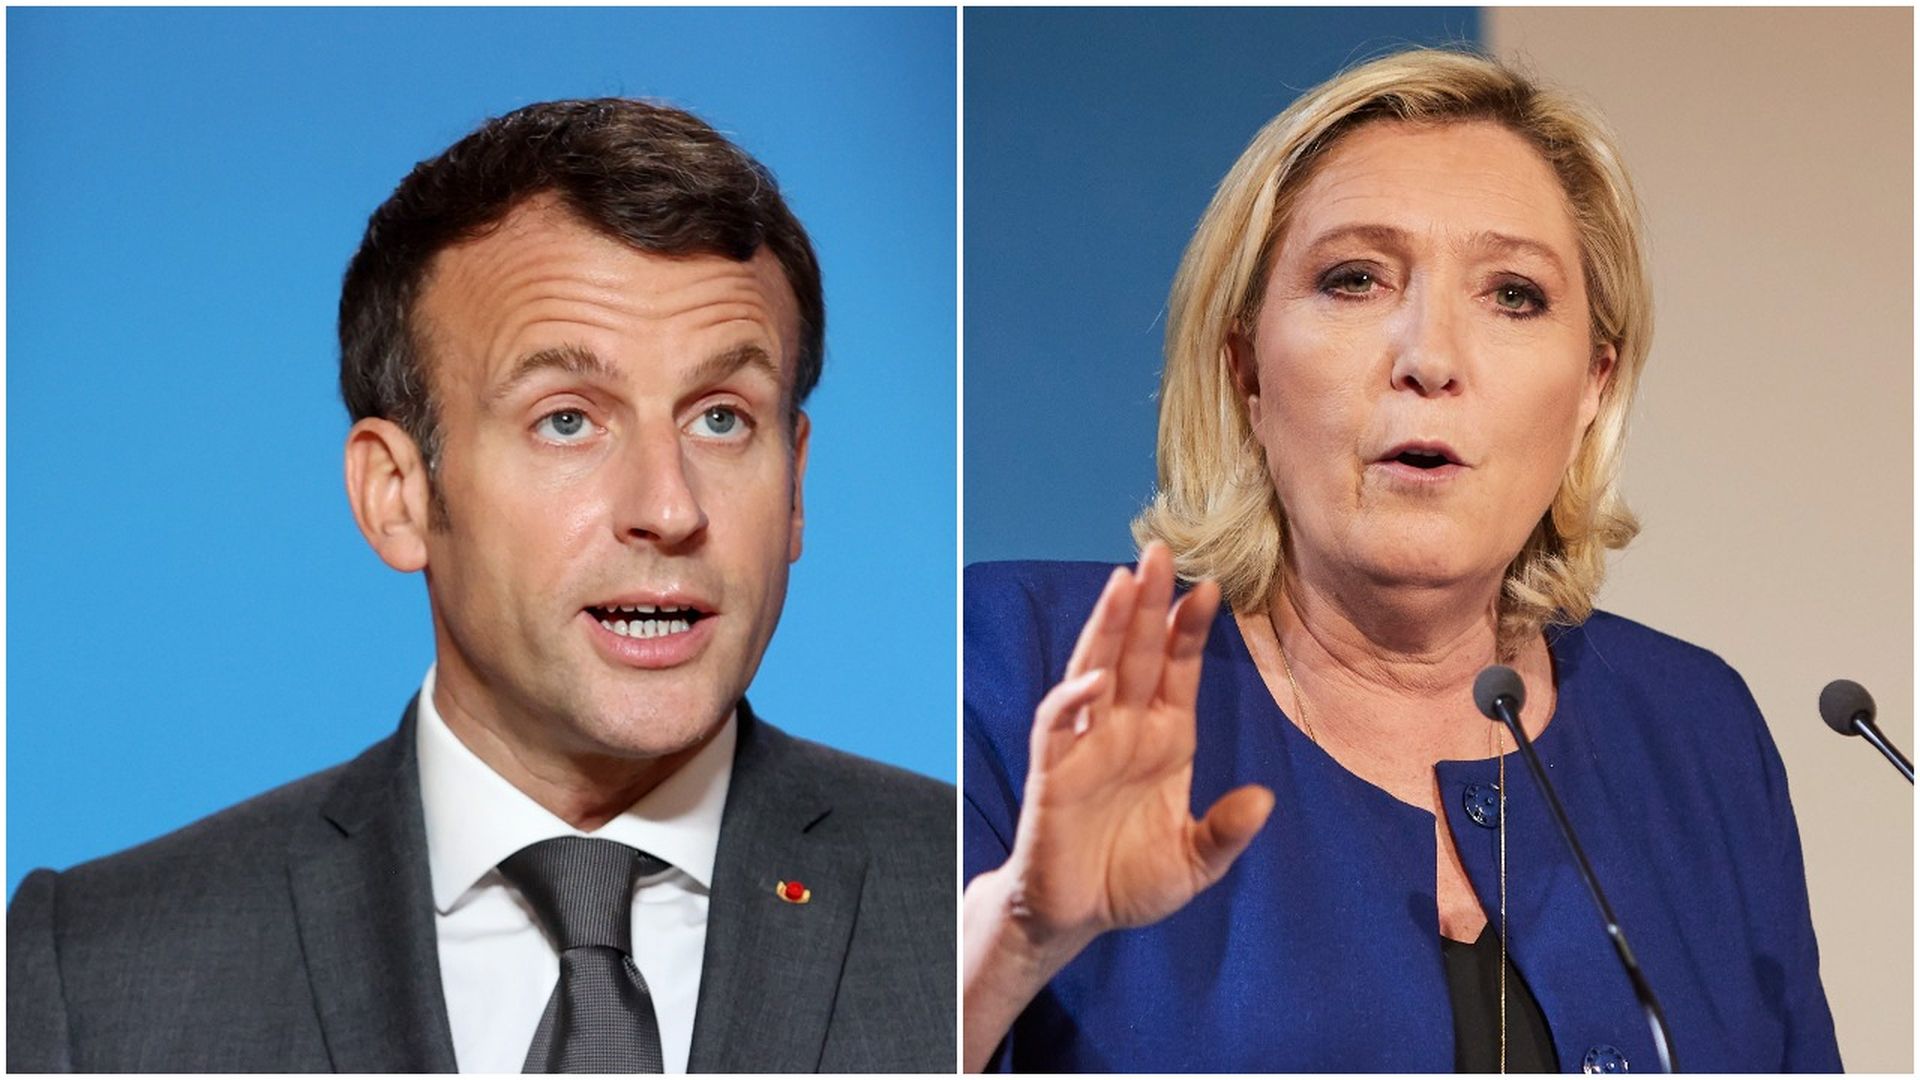 Combination images of French President Emmanuel Macron and far-right leader Marine Le Pen.